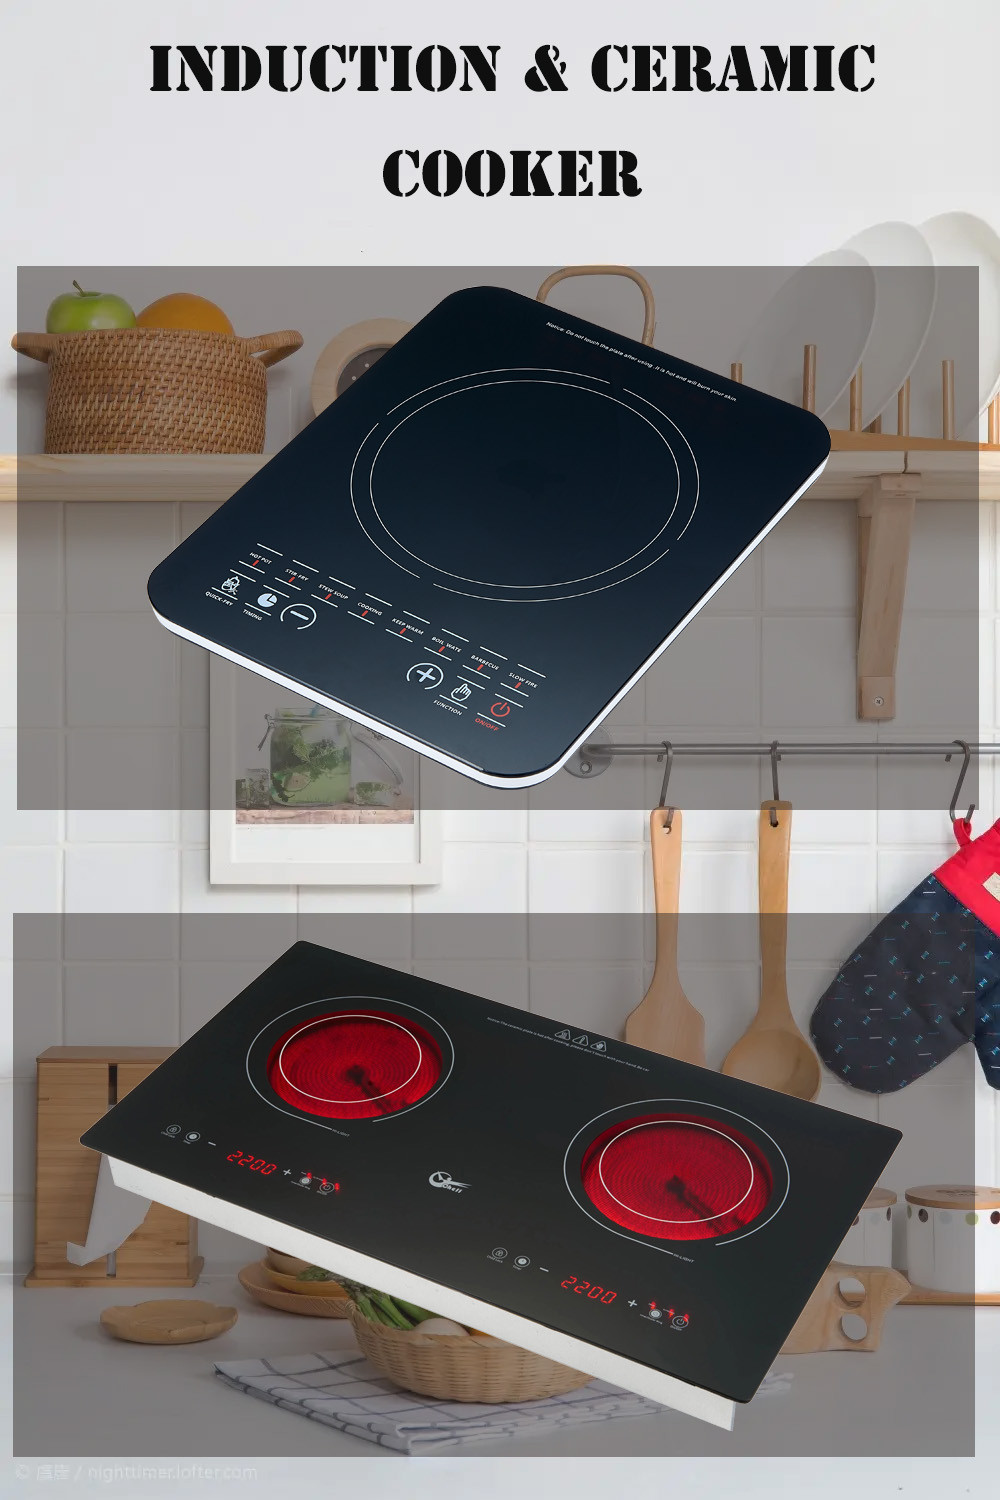 CHEFF-Catalog-Induction & Ceramic Cooker